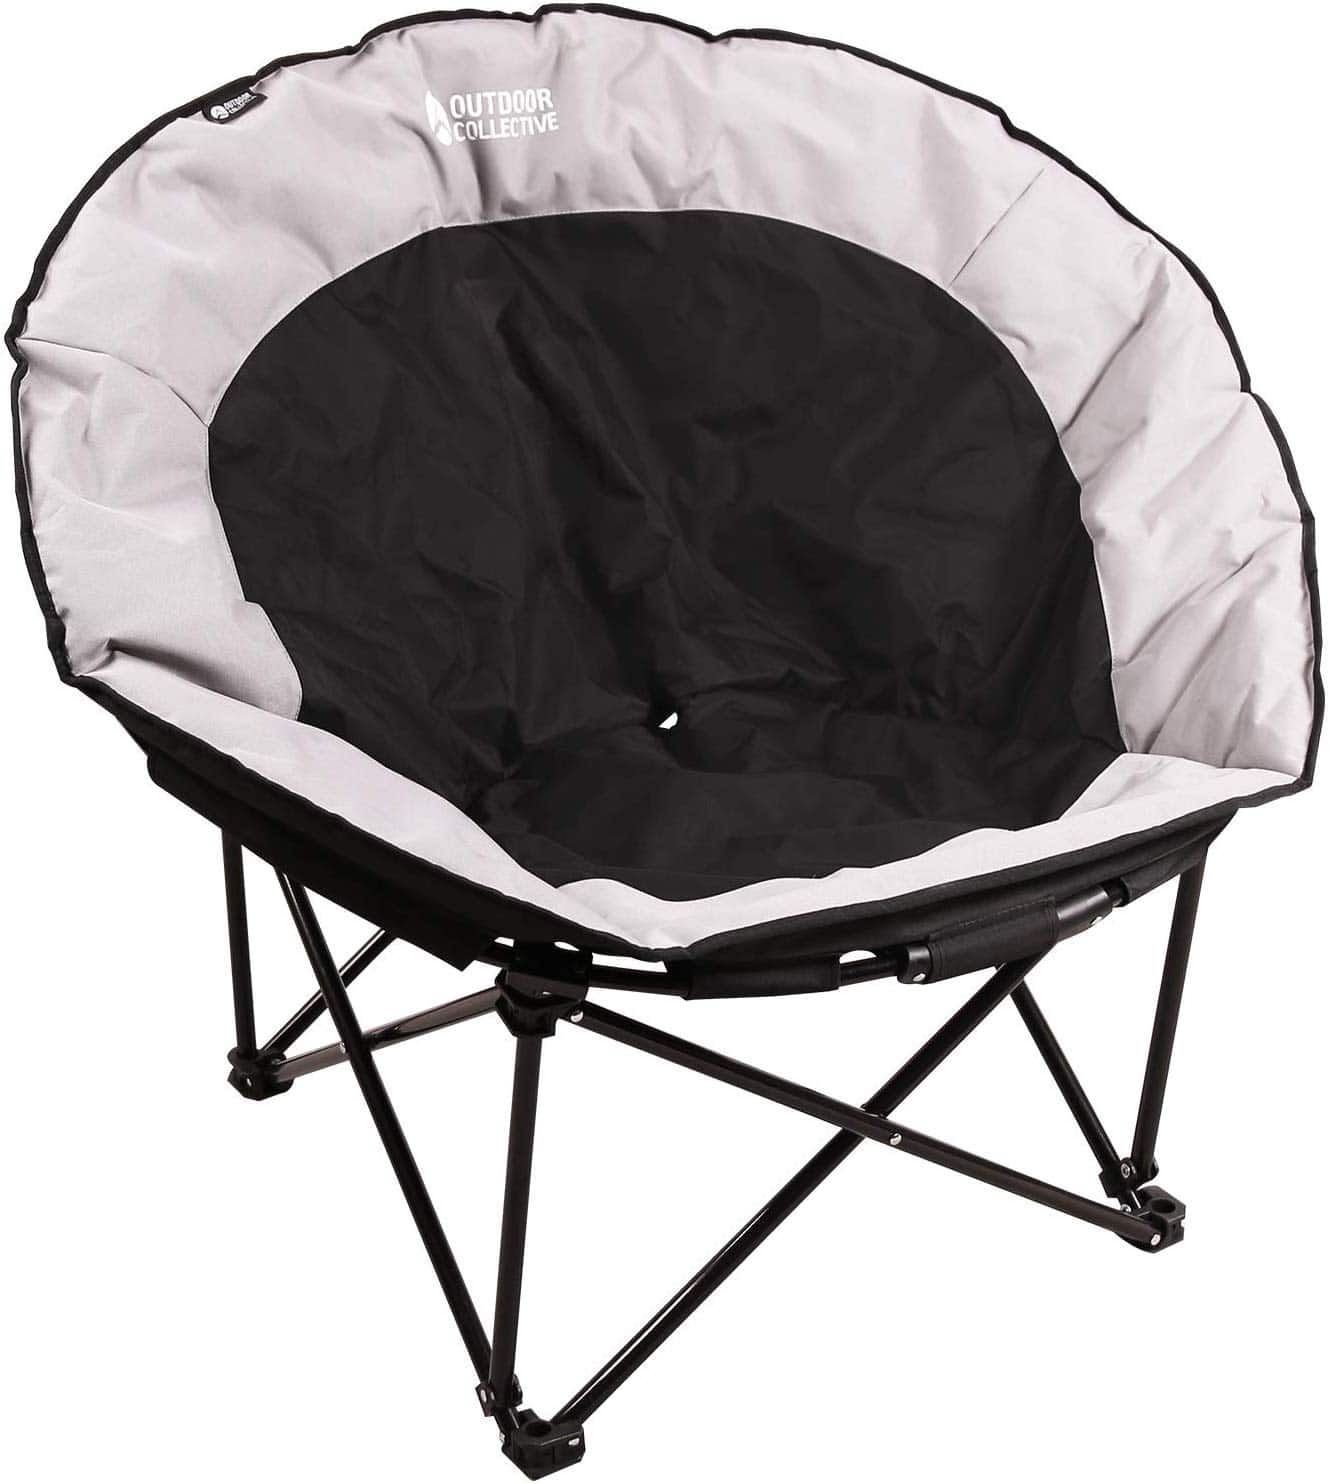 Redcamp Oversized Moon Chair 